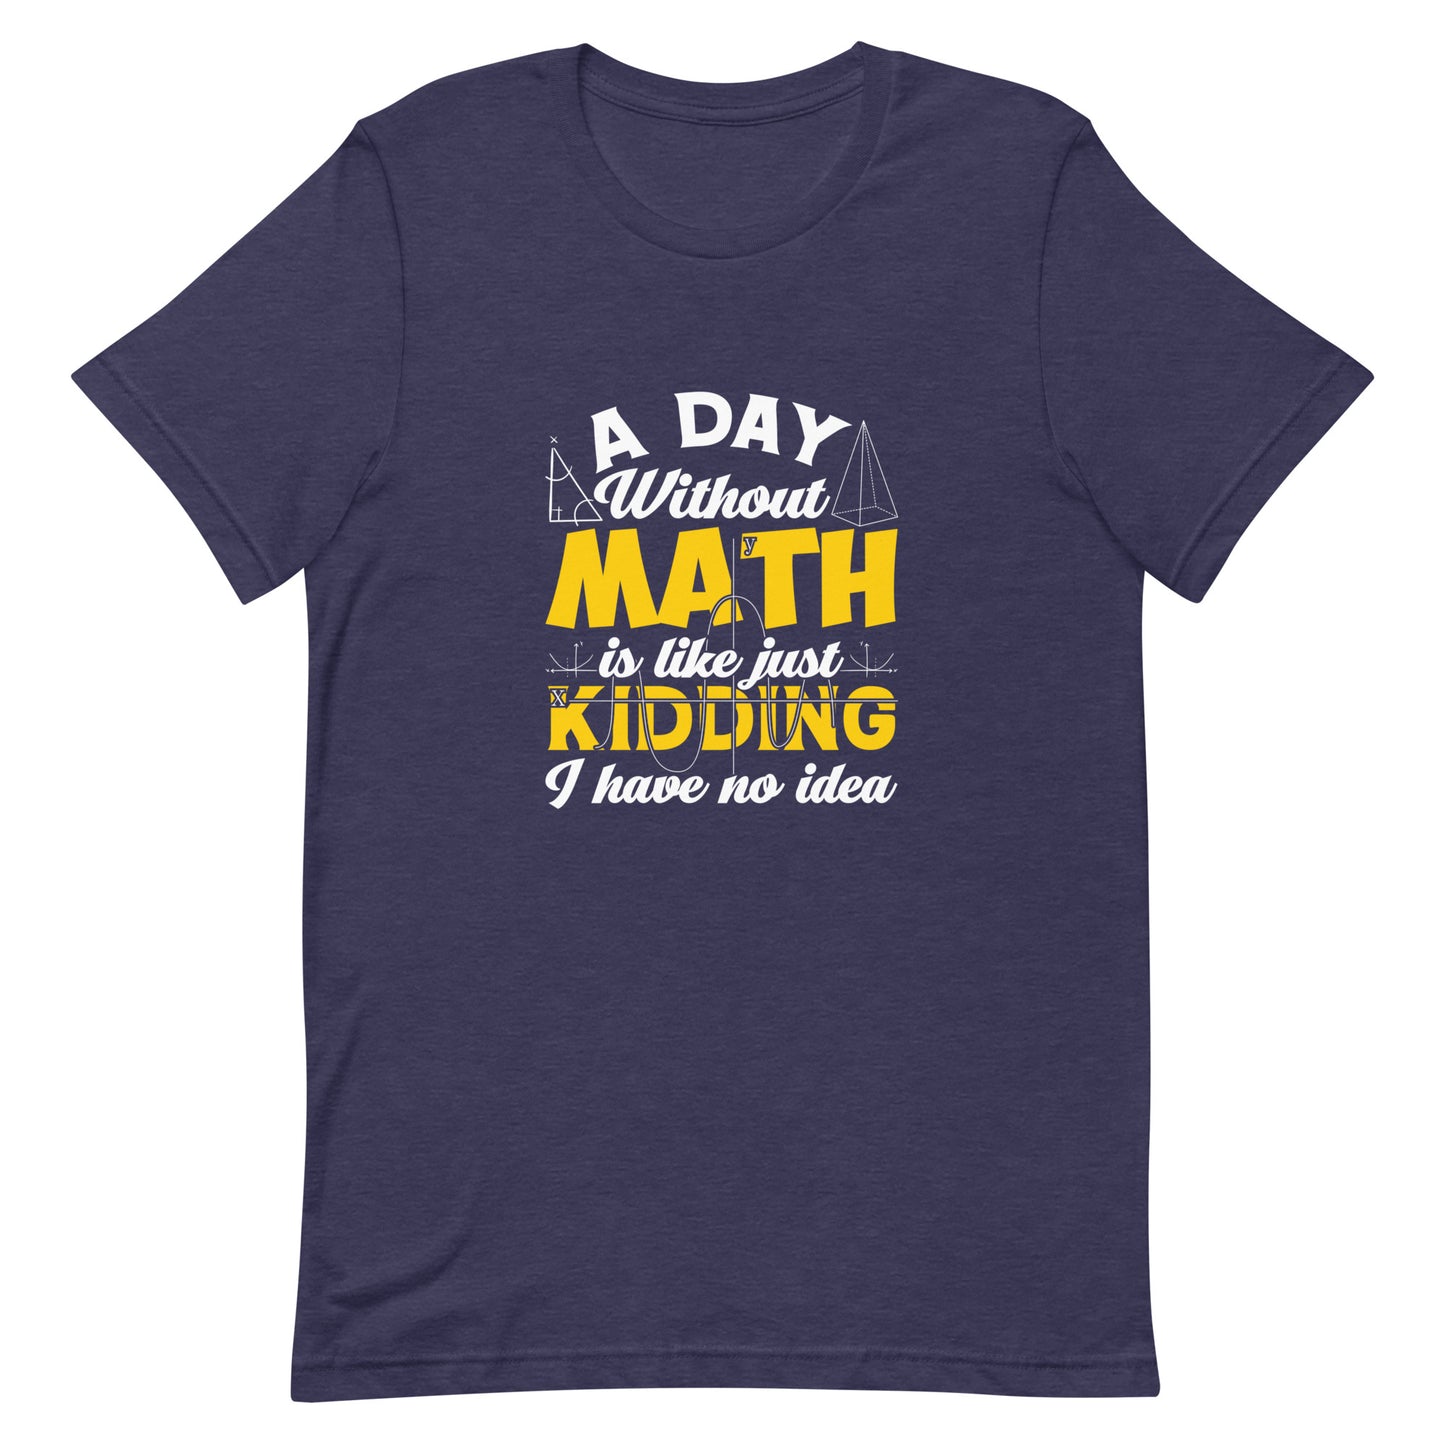 A Day Without Math Is Like Just Kidding I have No Idea Unisex Tee T-shirt Tshirt